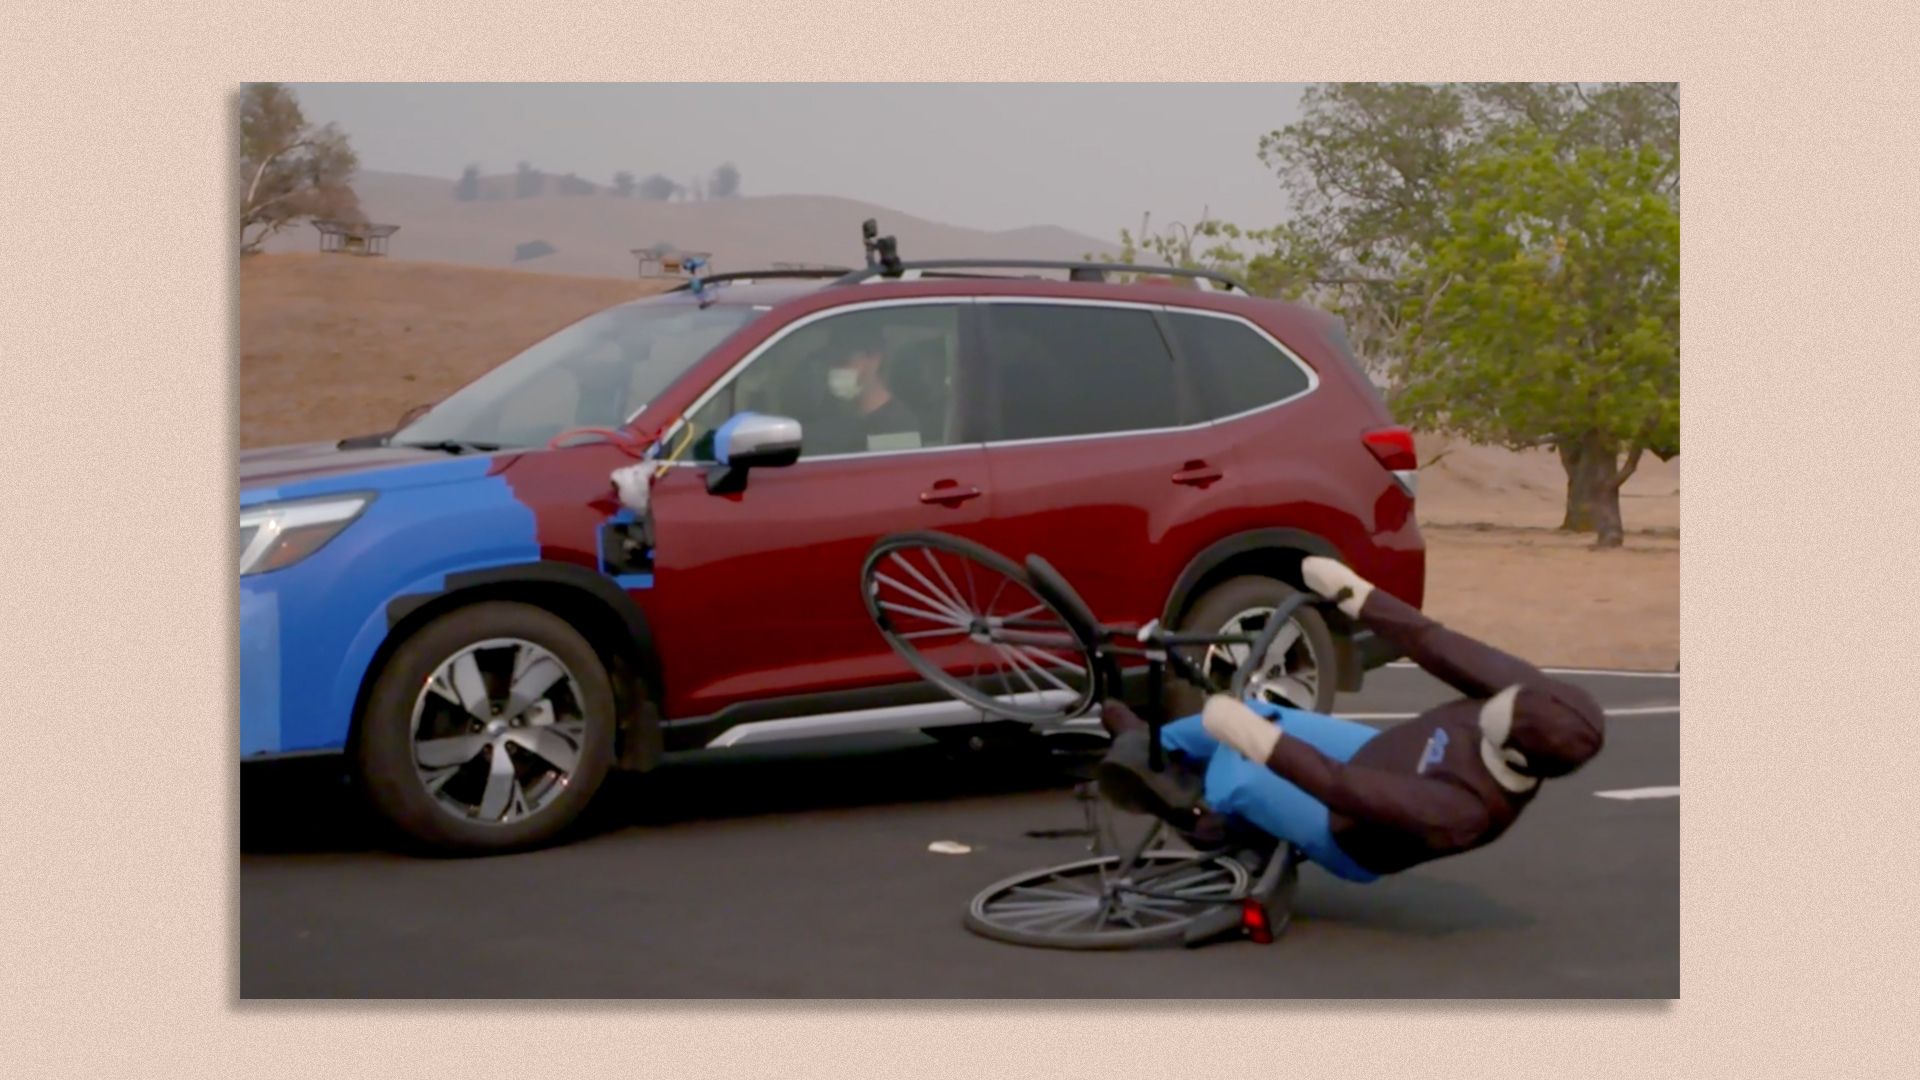 Screenshot from a crash video showing a dummy cyclist being hit by a car